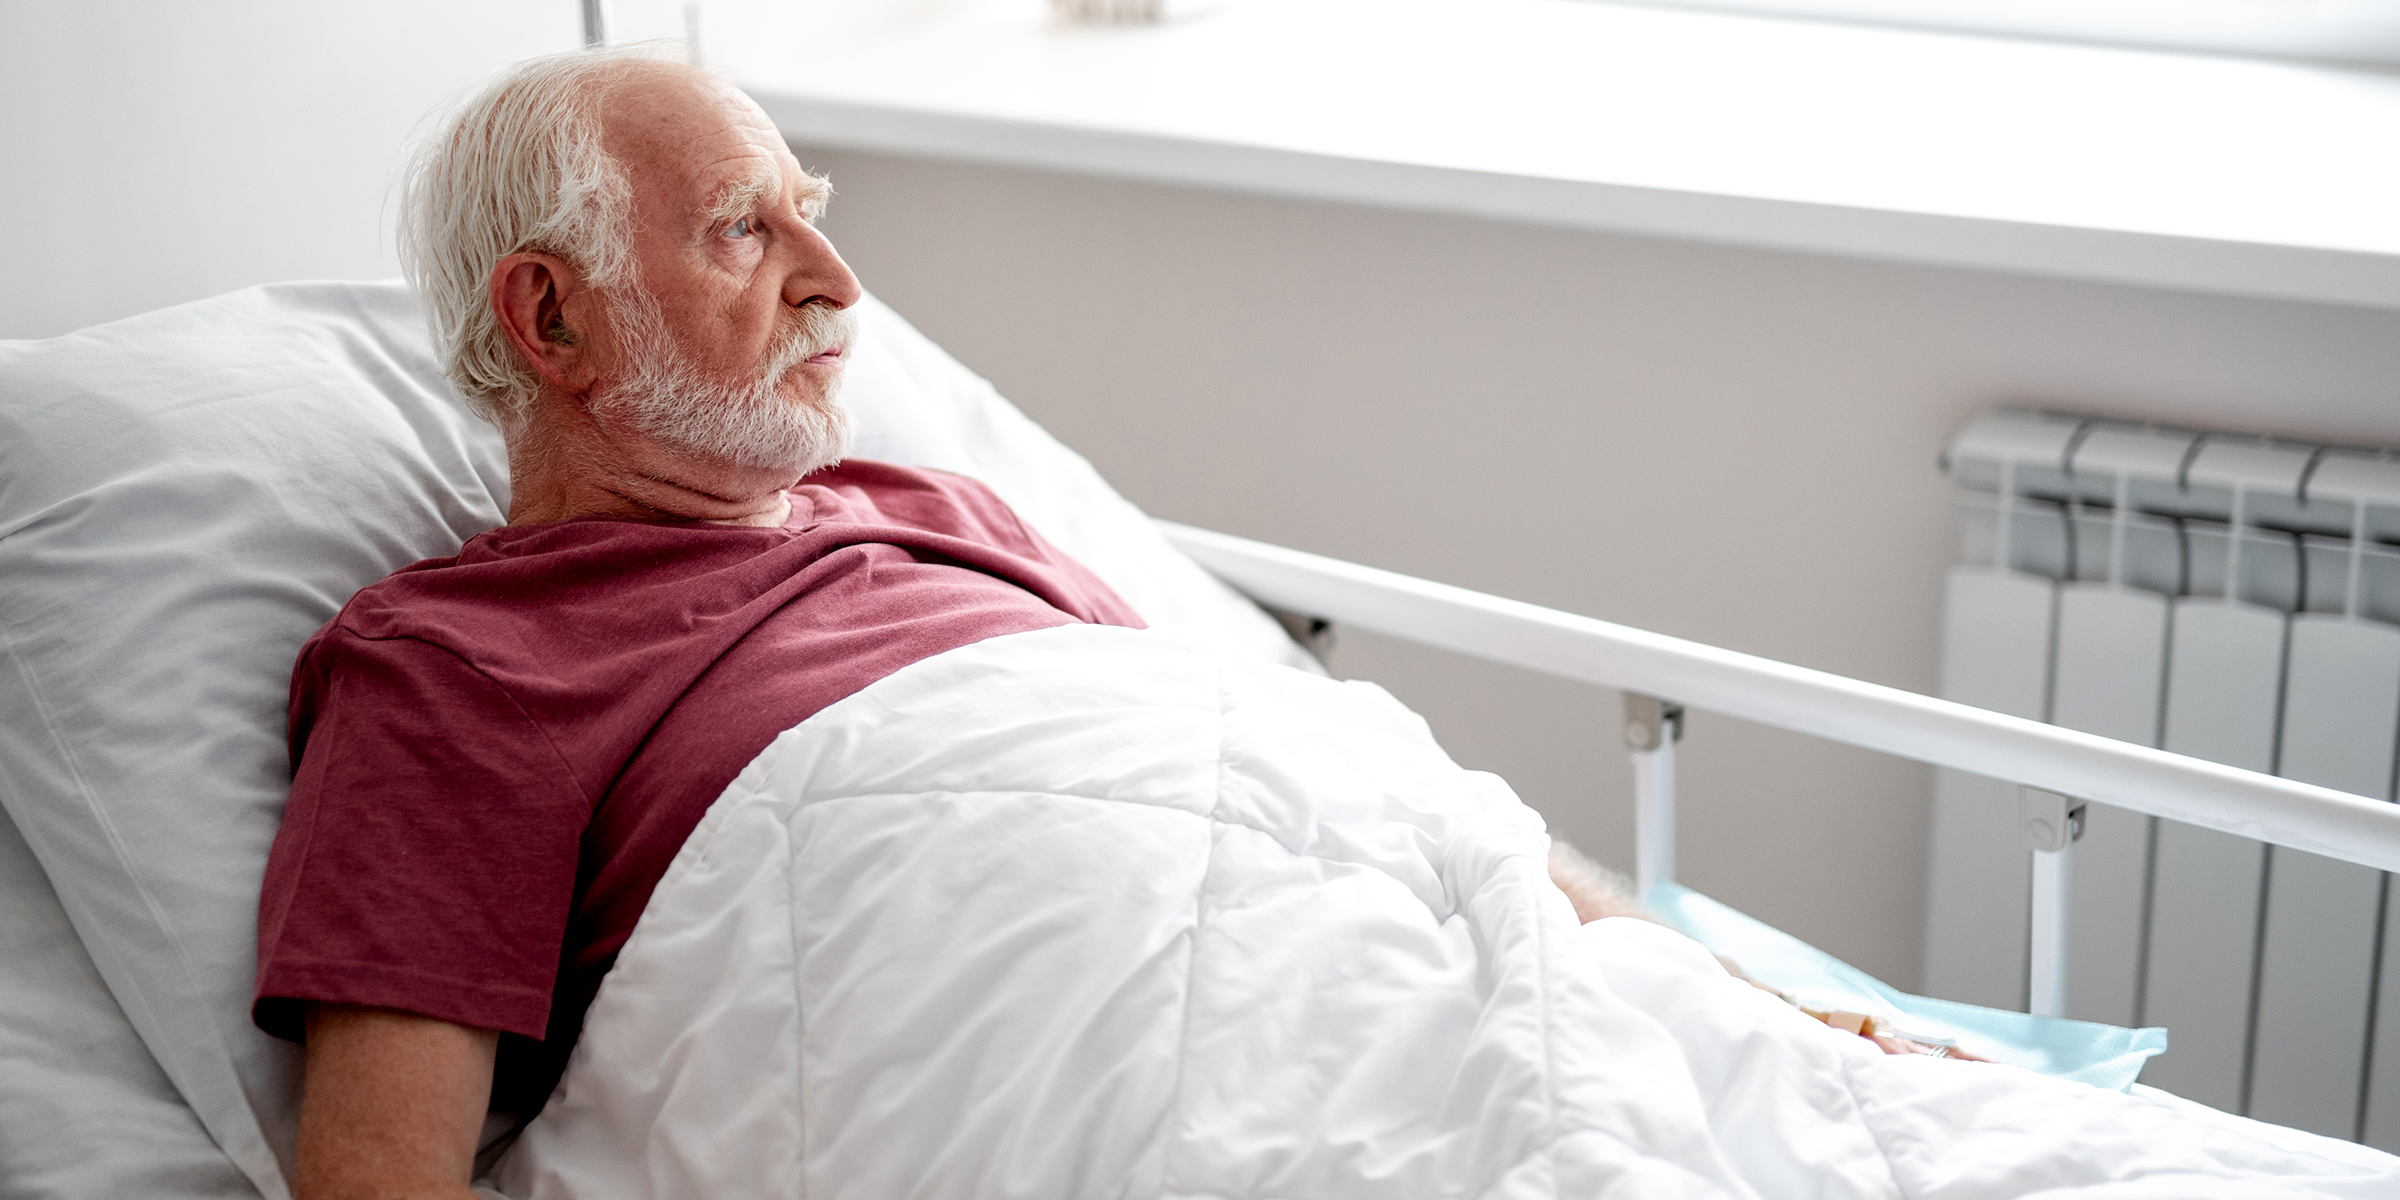 An old man at a hospital | Source: Shutterstock